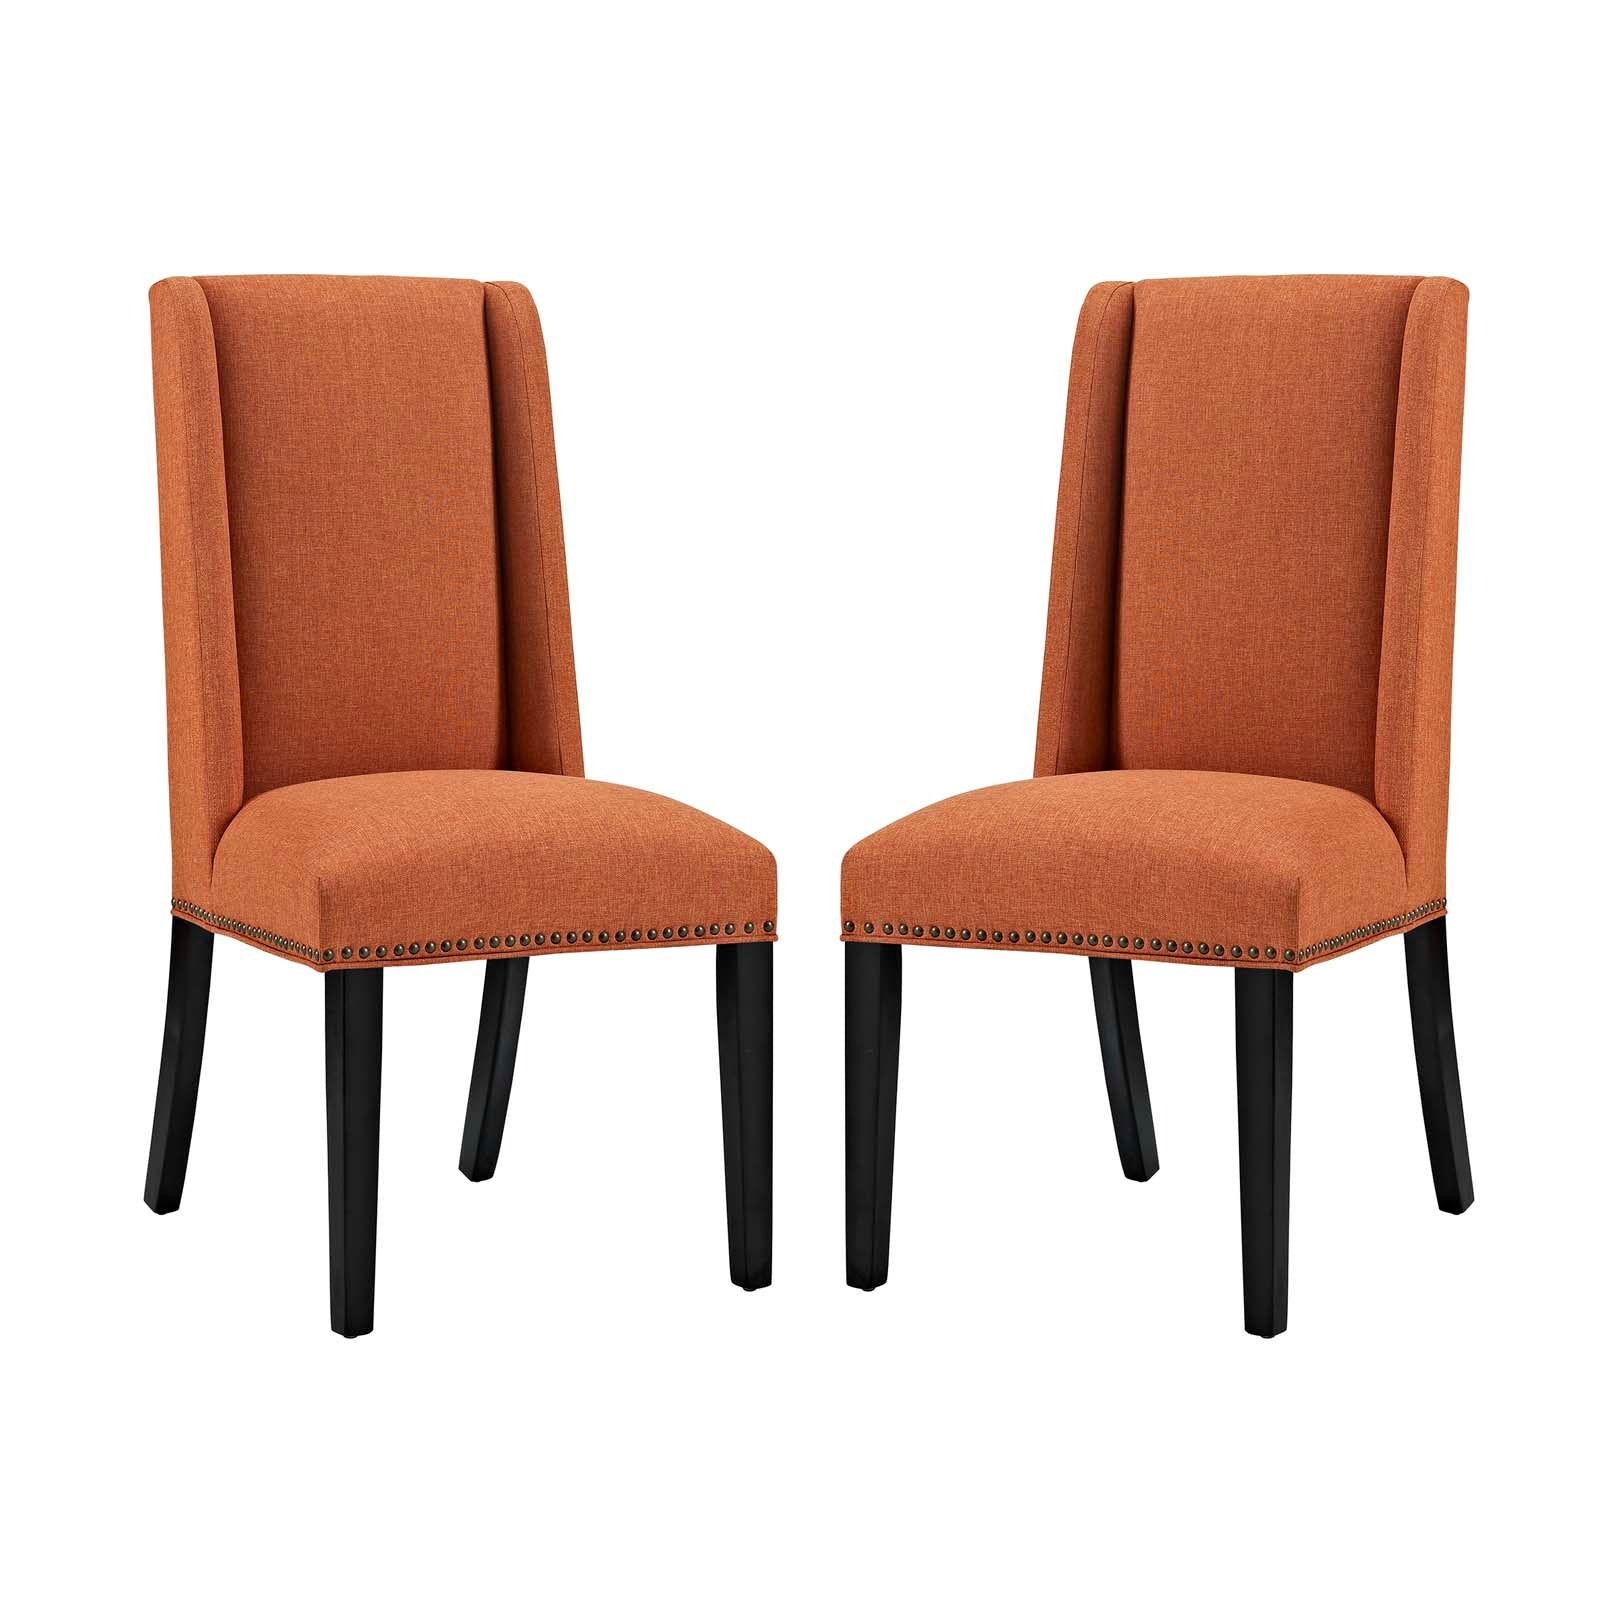 Modway Dining Chairs - Baron Dining Chair Fabric Set of 2 Orange